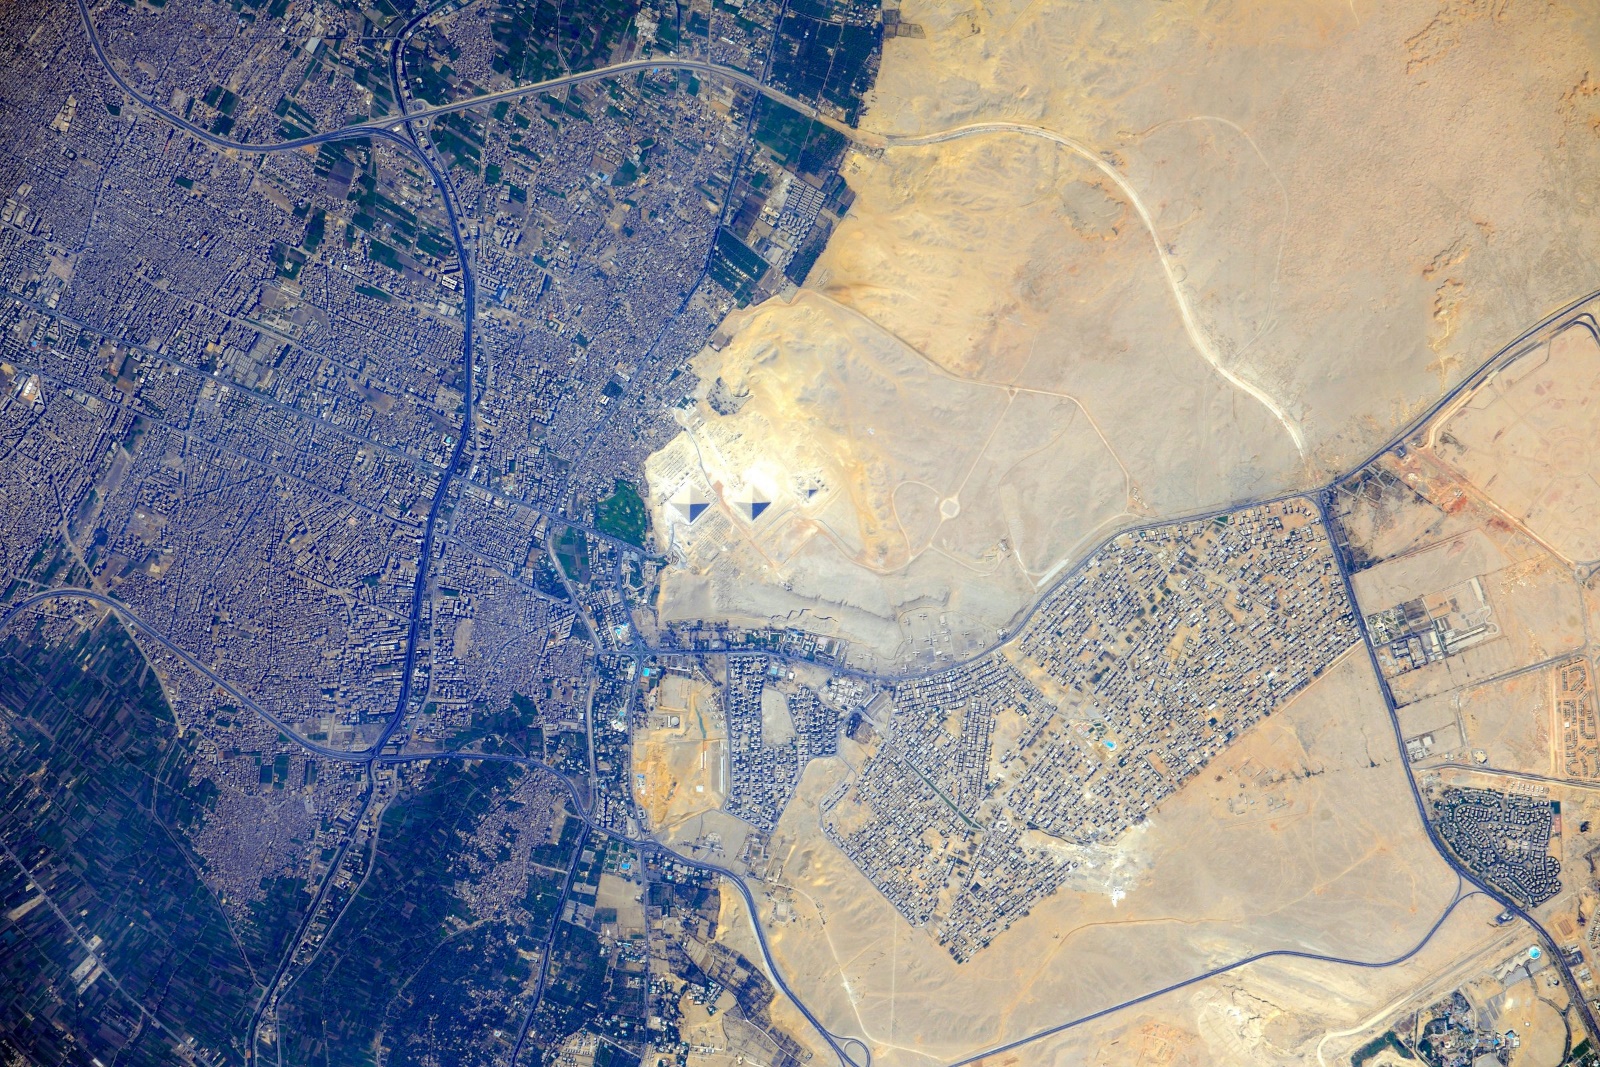 Pyramids of Giza, Egypt from space